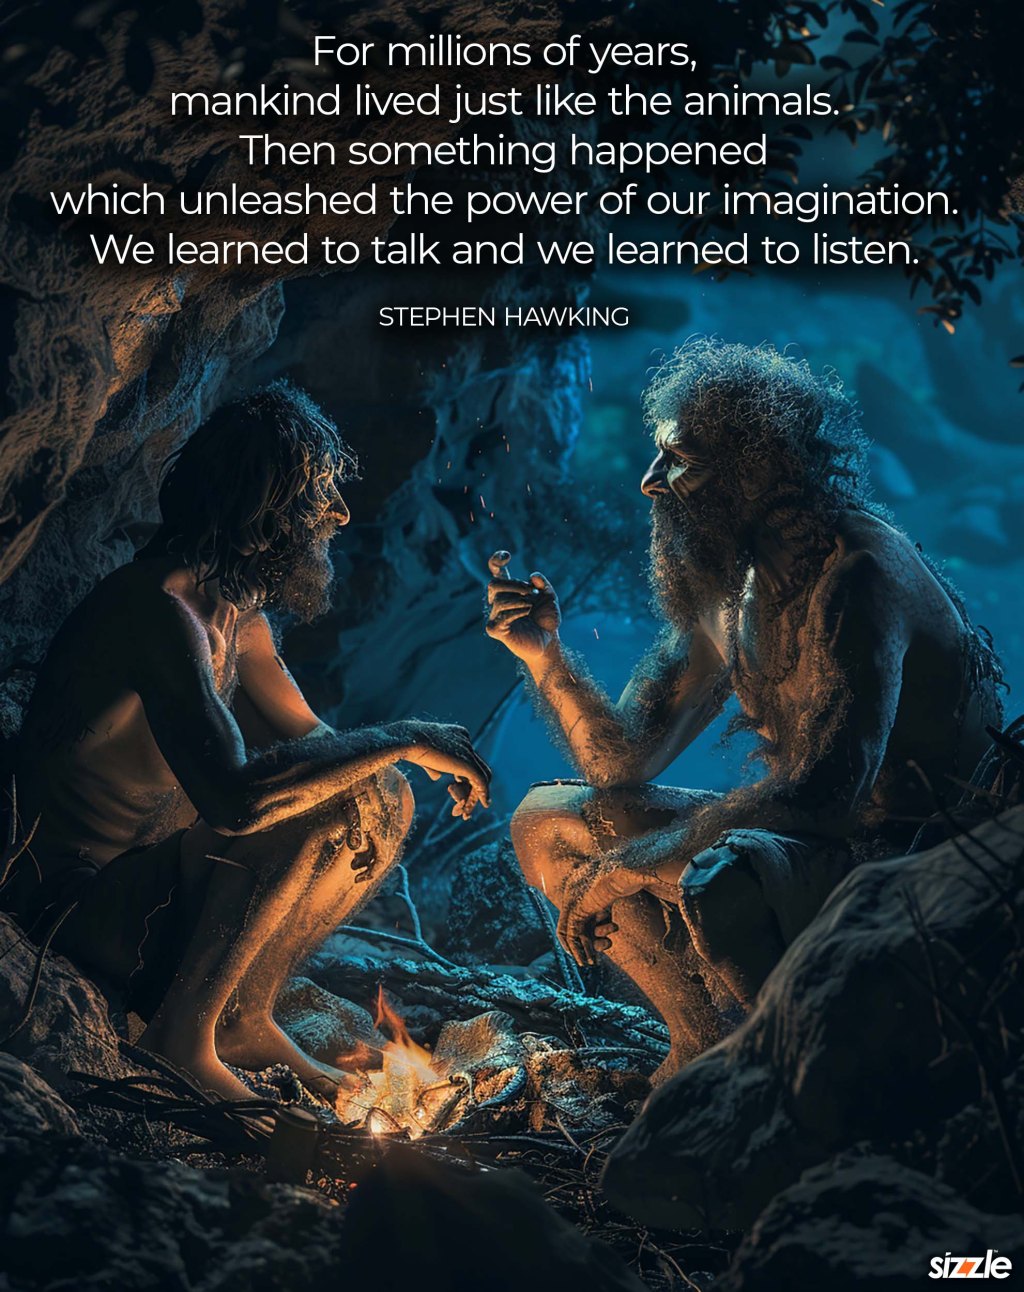 For millions of years, mankind lived just like the animals. Then something happened which unleashed the power of our imagination. We learned to talk and we learned to listen.